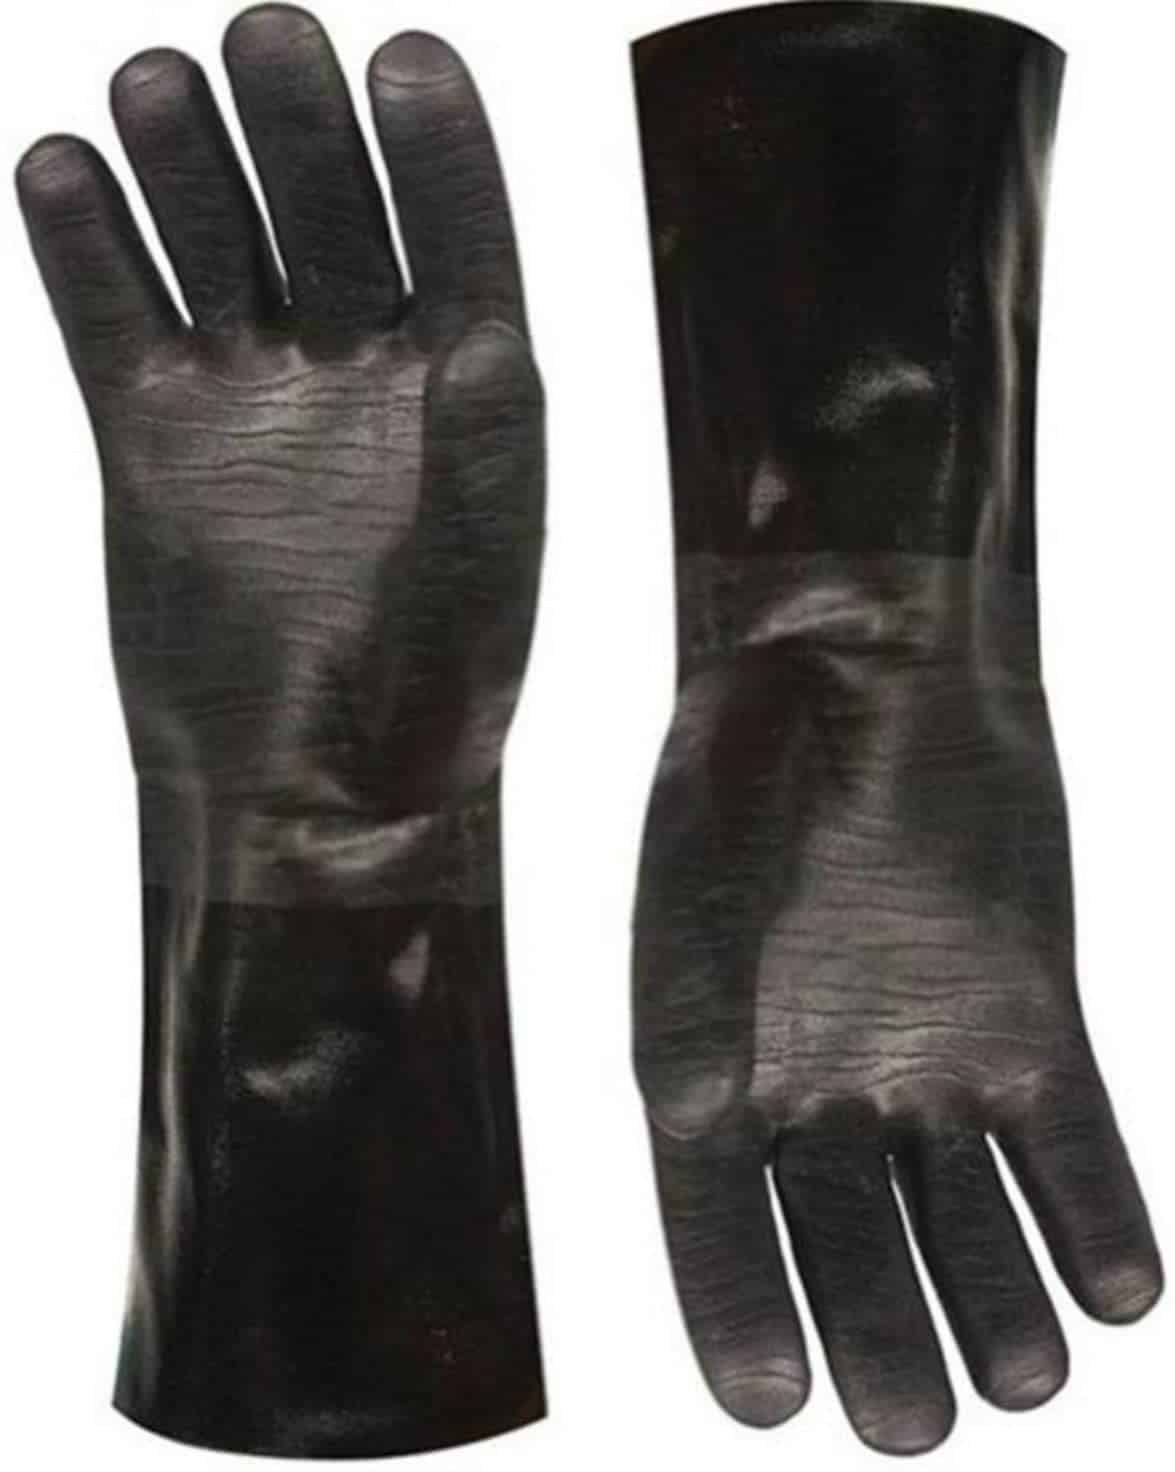 Best BBQ gloves for smokers- Artisan Griller BBQ Heat Resistant Insulated